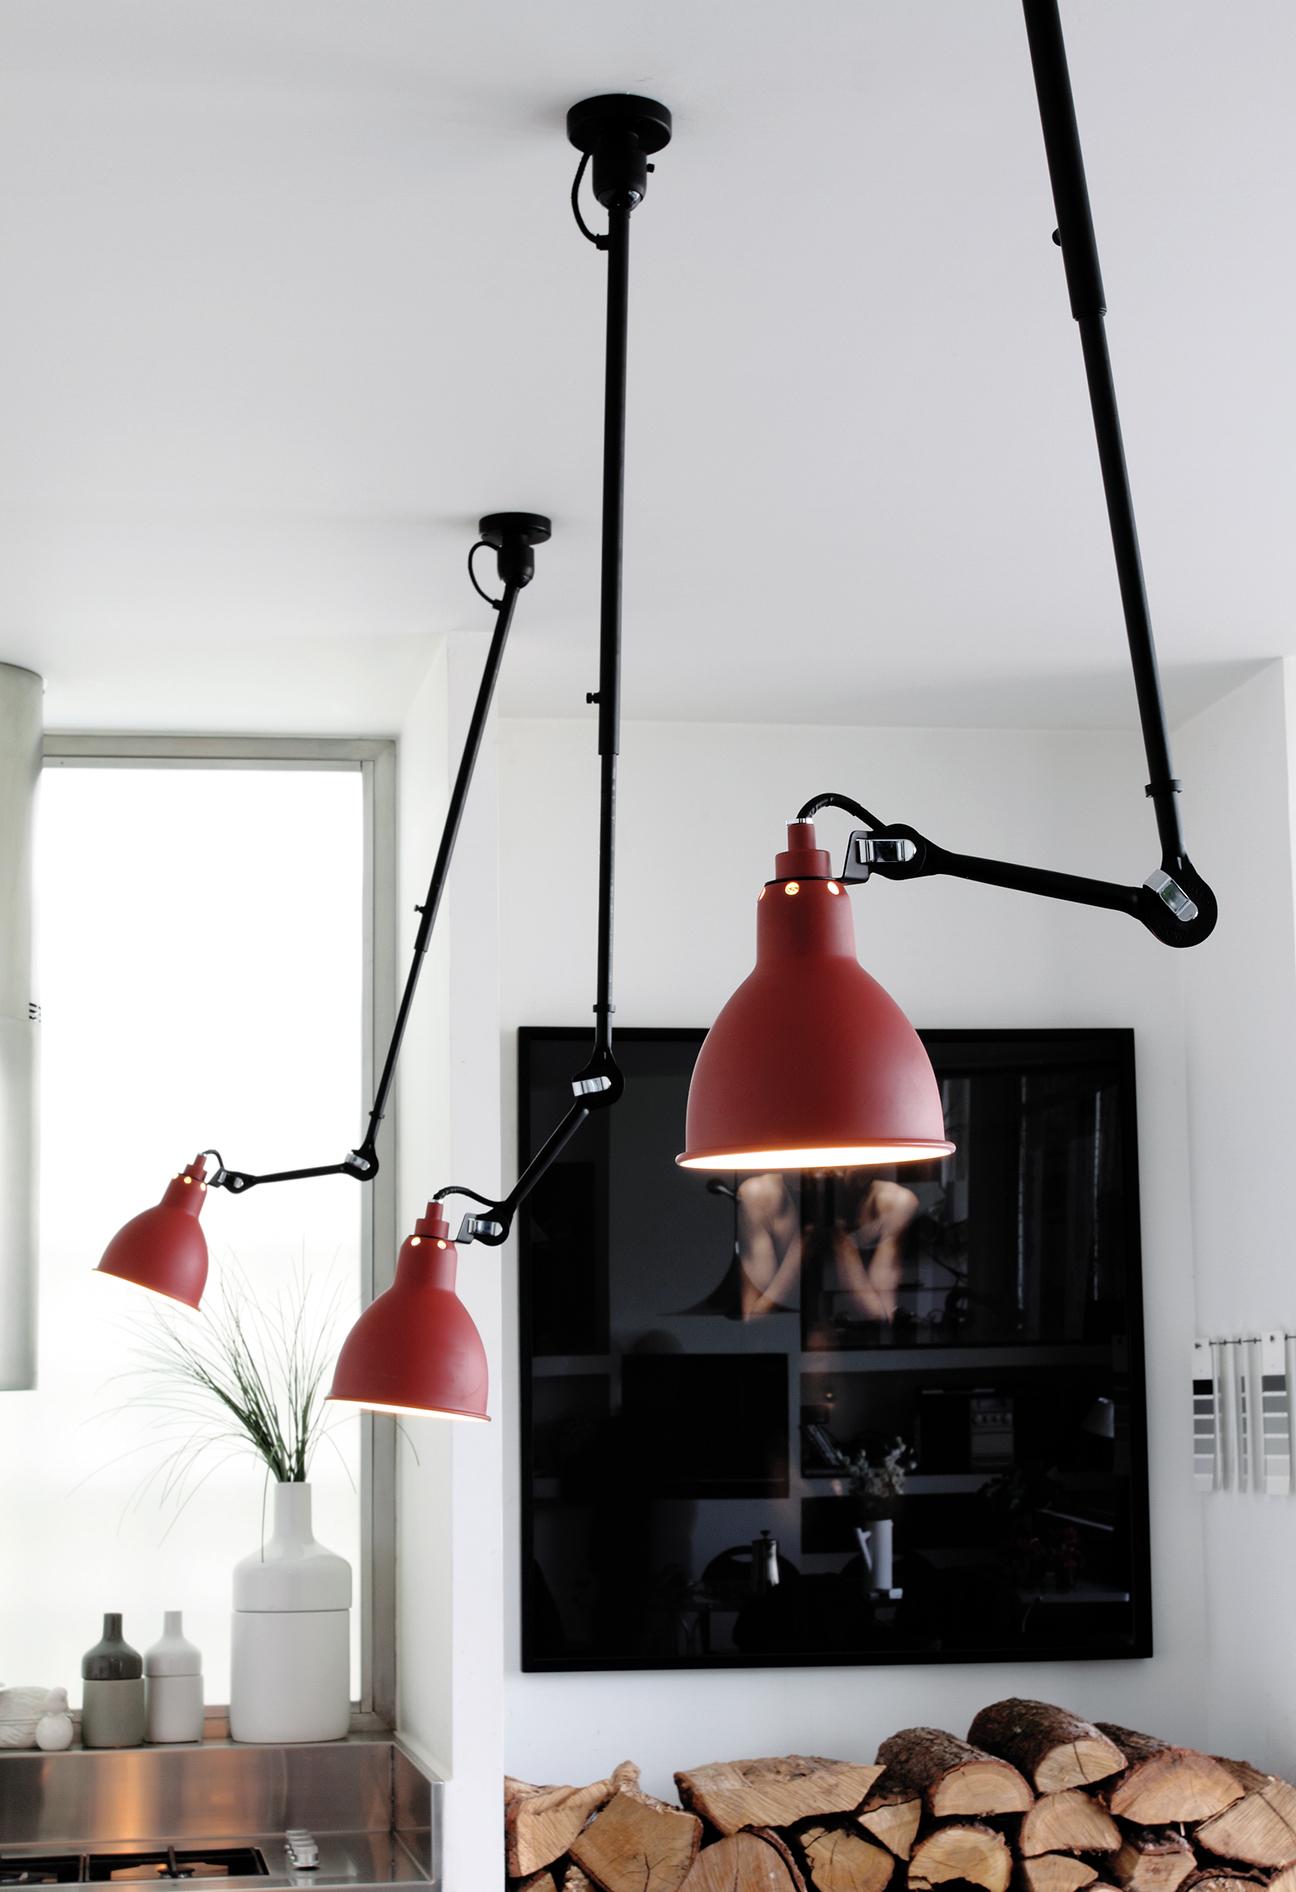 Steel DCW Editions La Lampe Gras N°302 Conical Wall Lamp in Black Arm and Black Shade For Sale